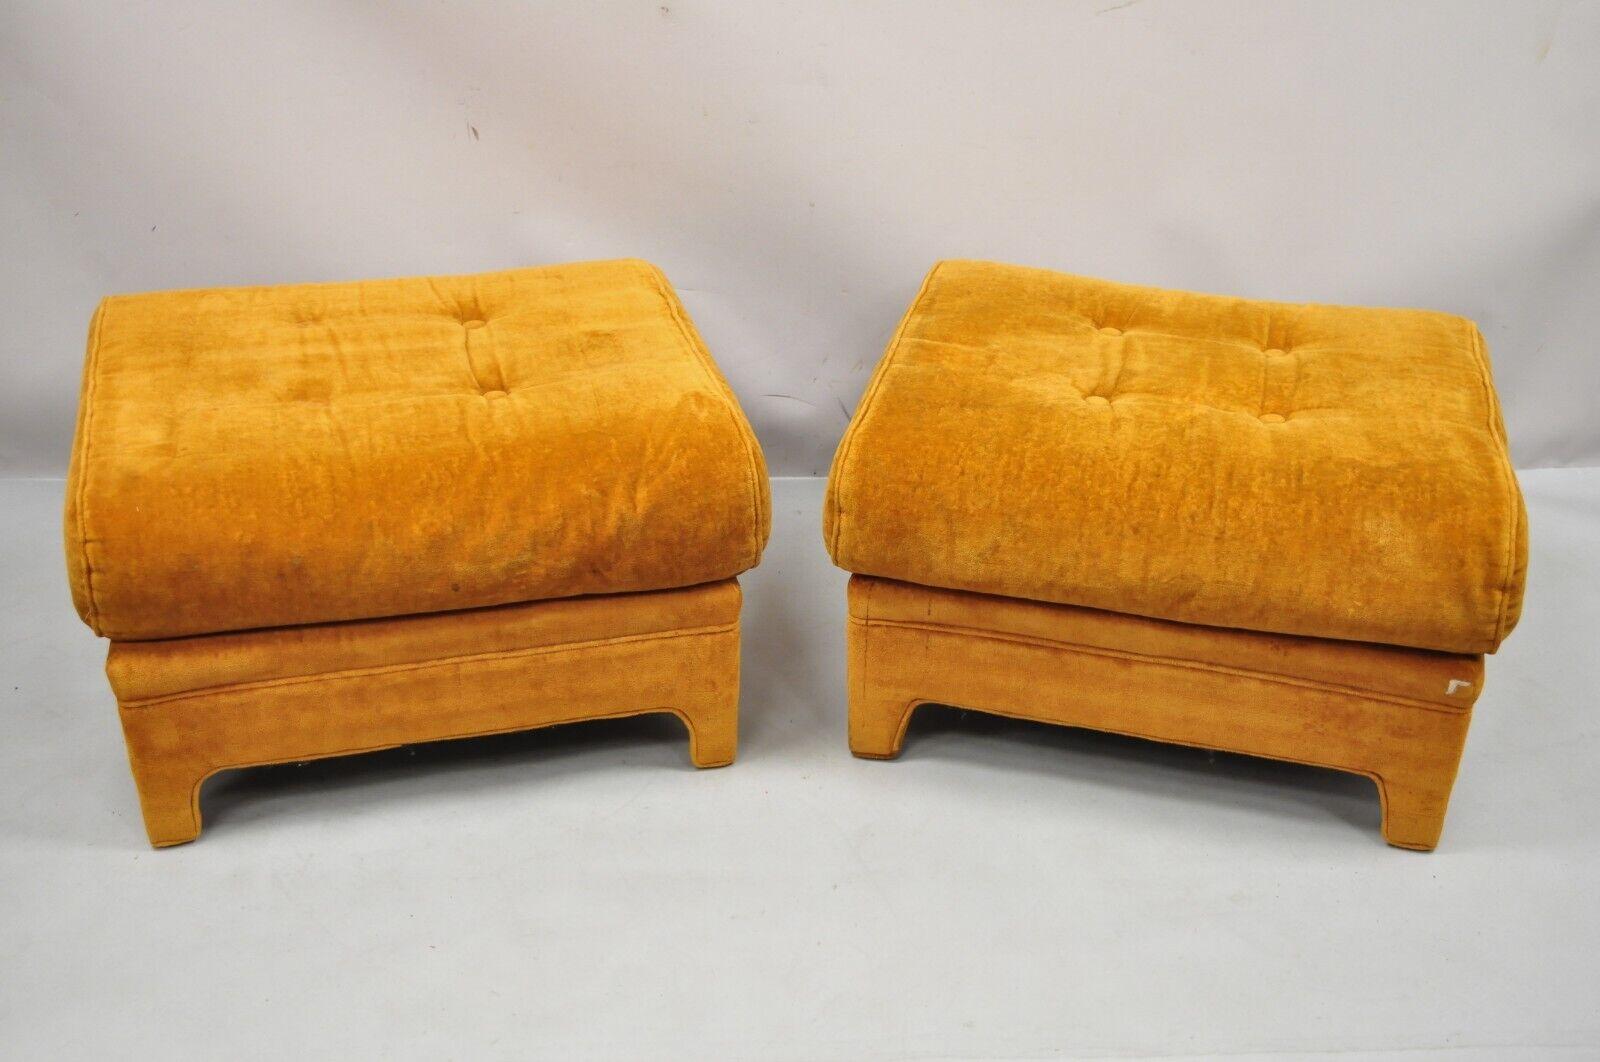 Mid-Century Modern Orange Oversized Fully Upholstered Ottomans by Pembrook - A Pair. Item features original orange fully upholstered frames, nice oversized design, solid wood frames, original label, very nice vintage pair, clean modernist lines.